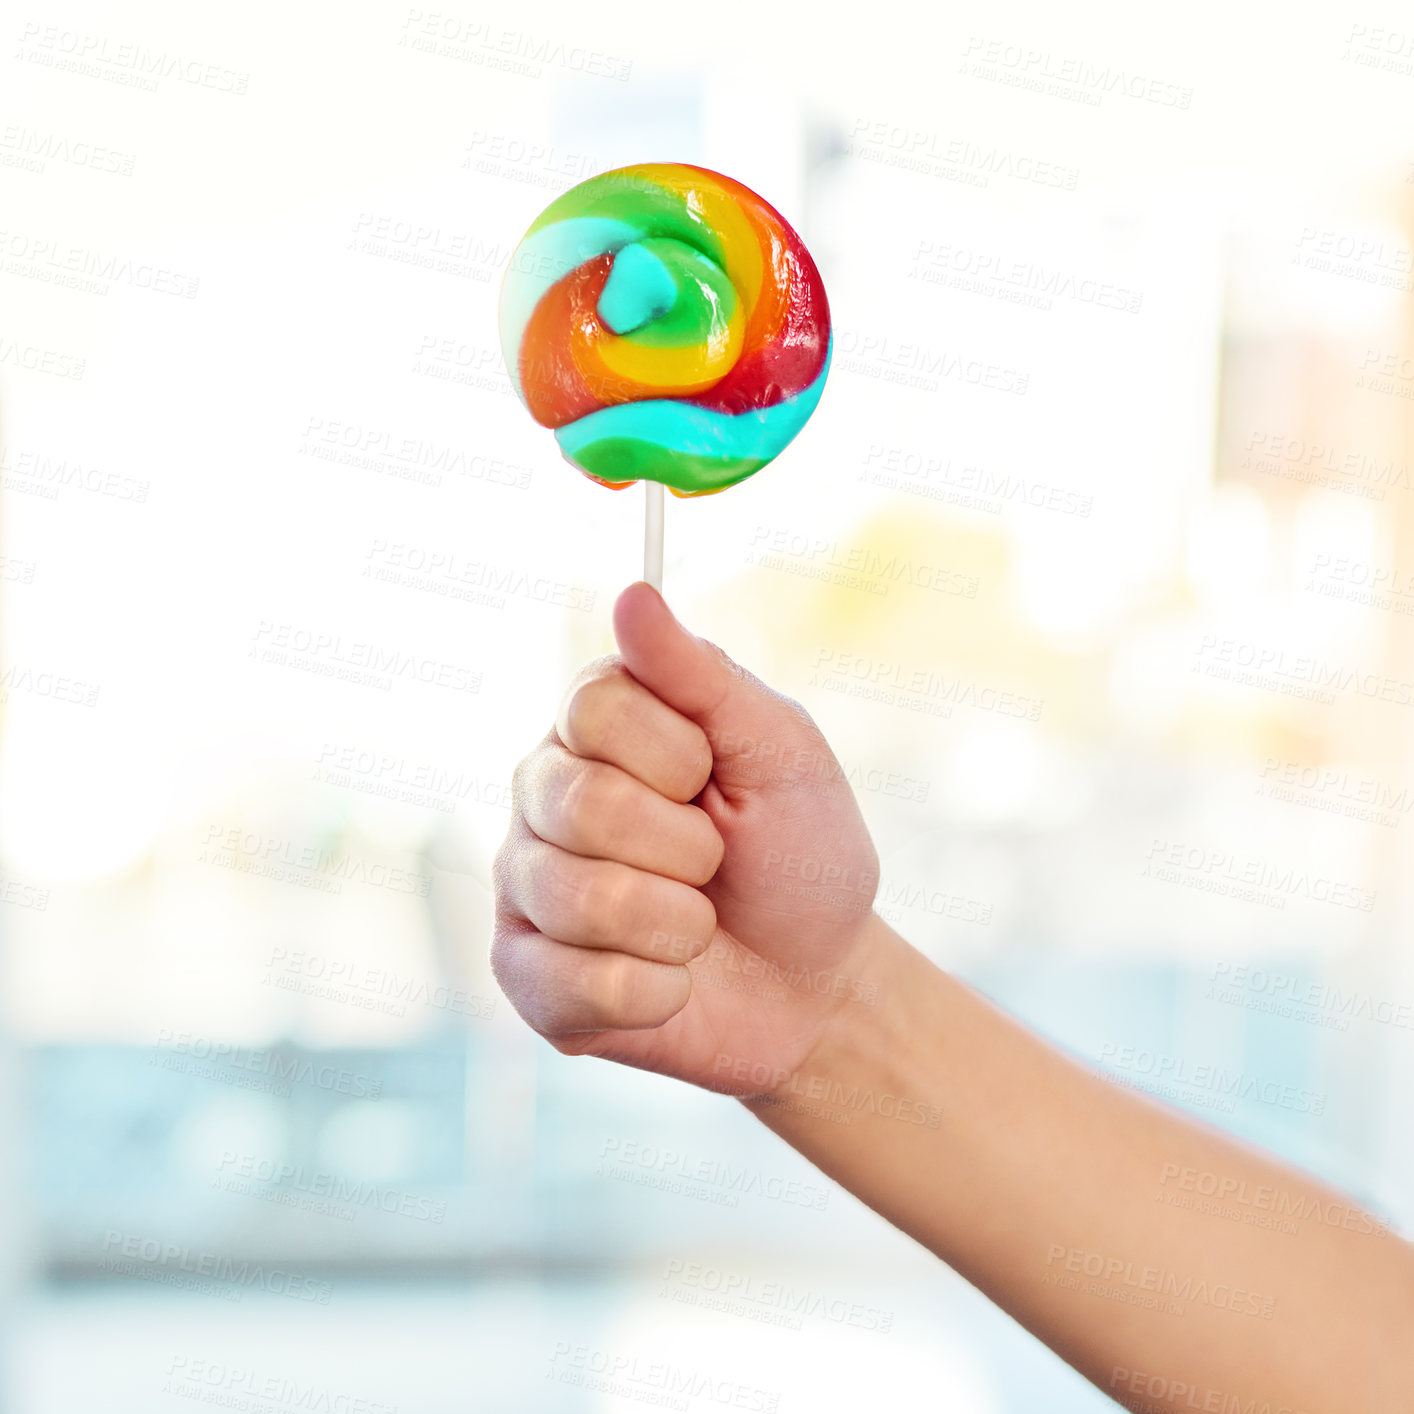 Buy stock photo Shot of an unrecognizable young child holding a lollipop sucker at home